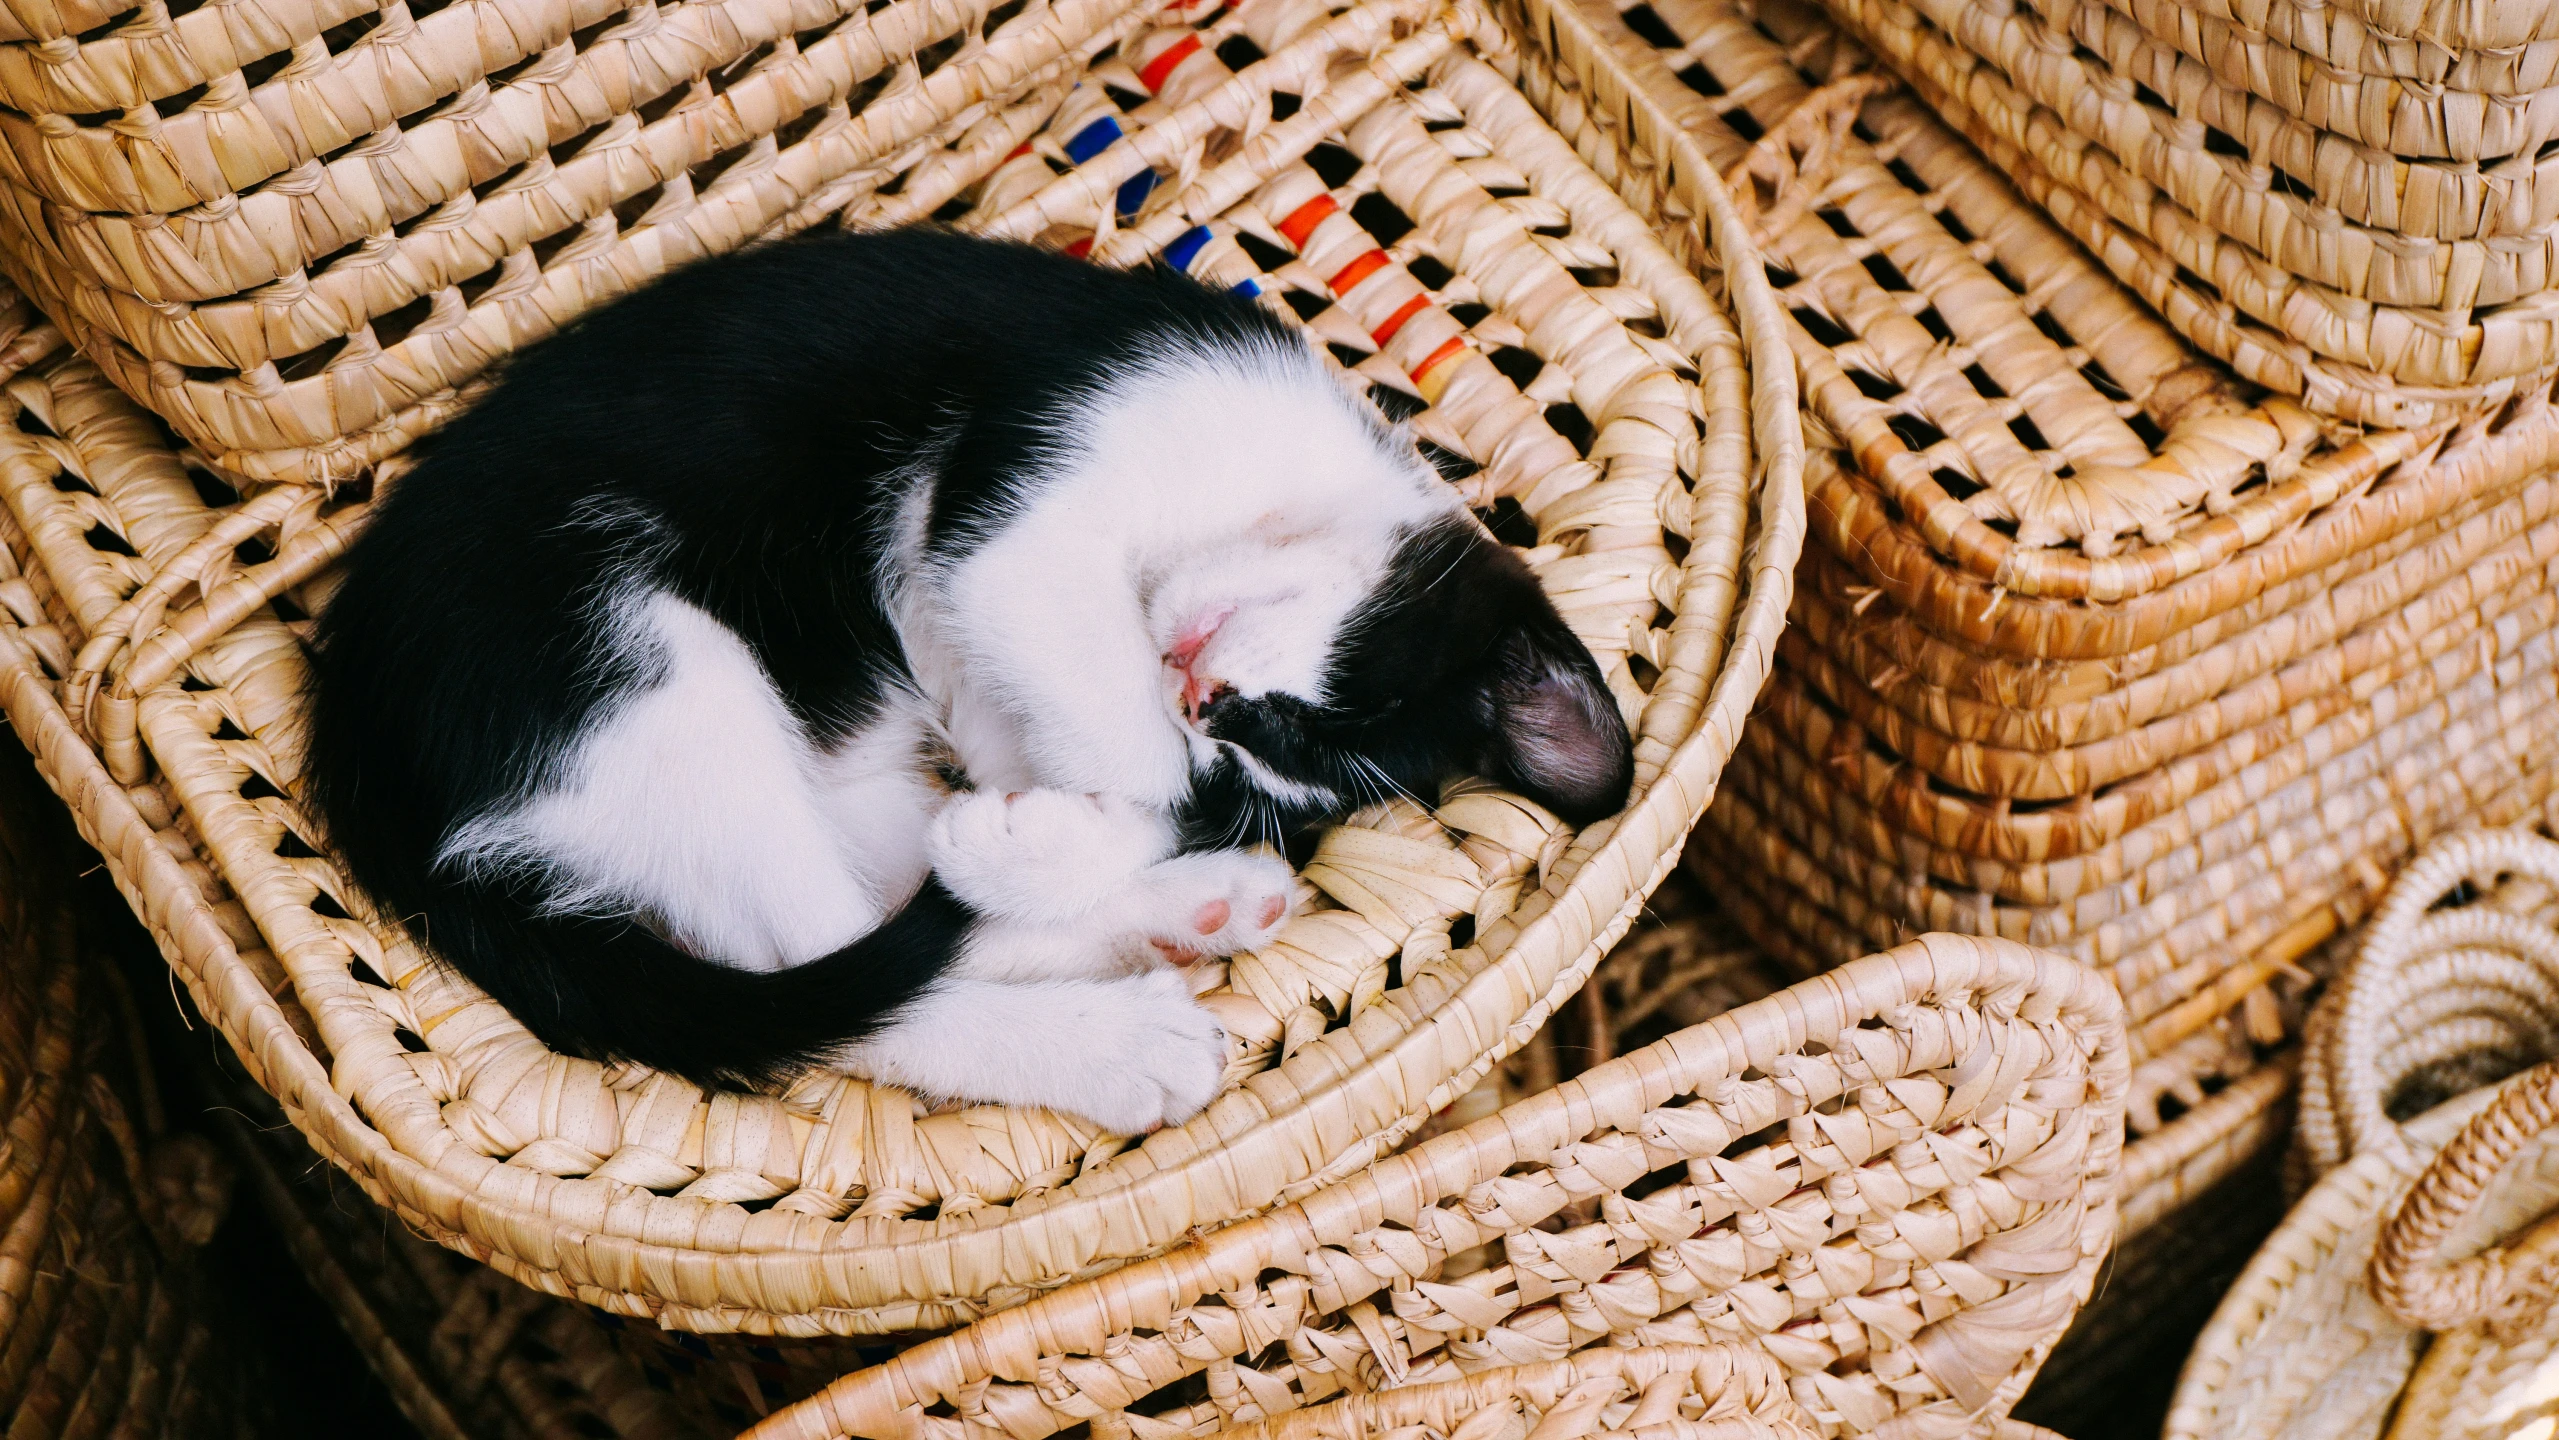 a small cat curled up asleep in a basket